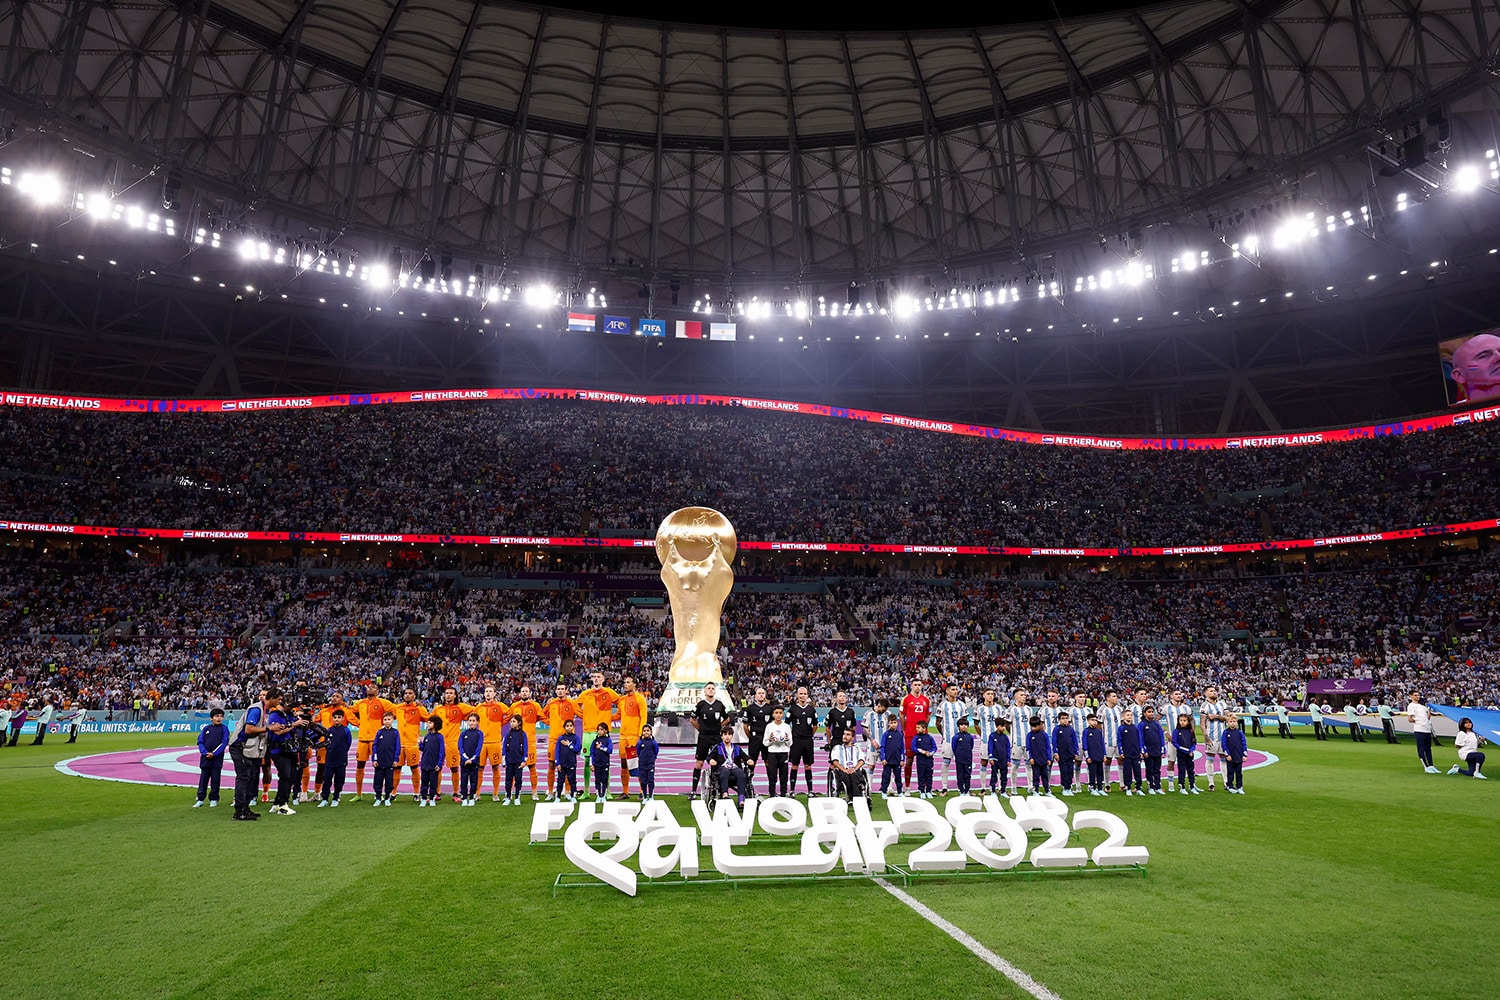 Netherlands and Argentina squads line up for photos before their World Cup match